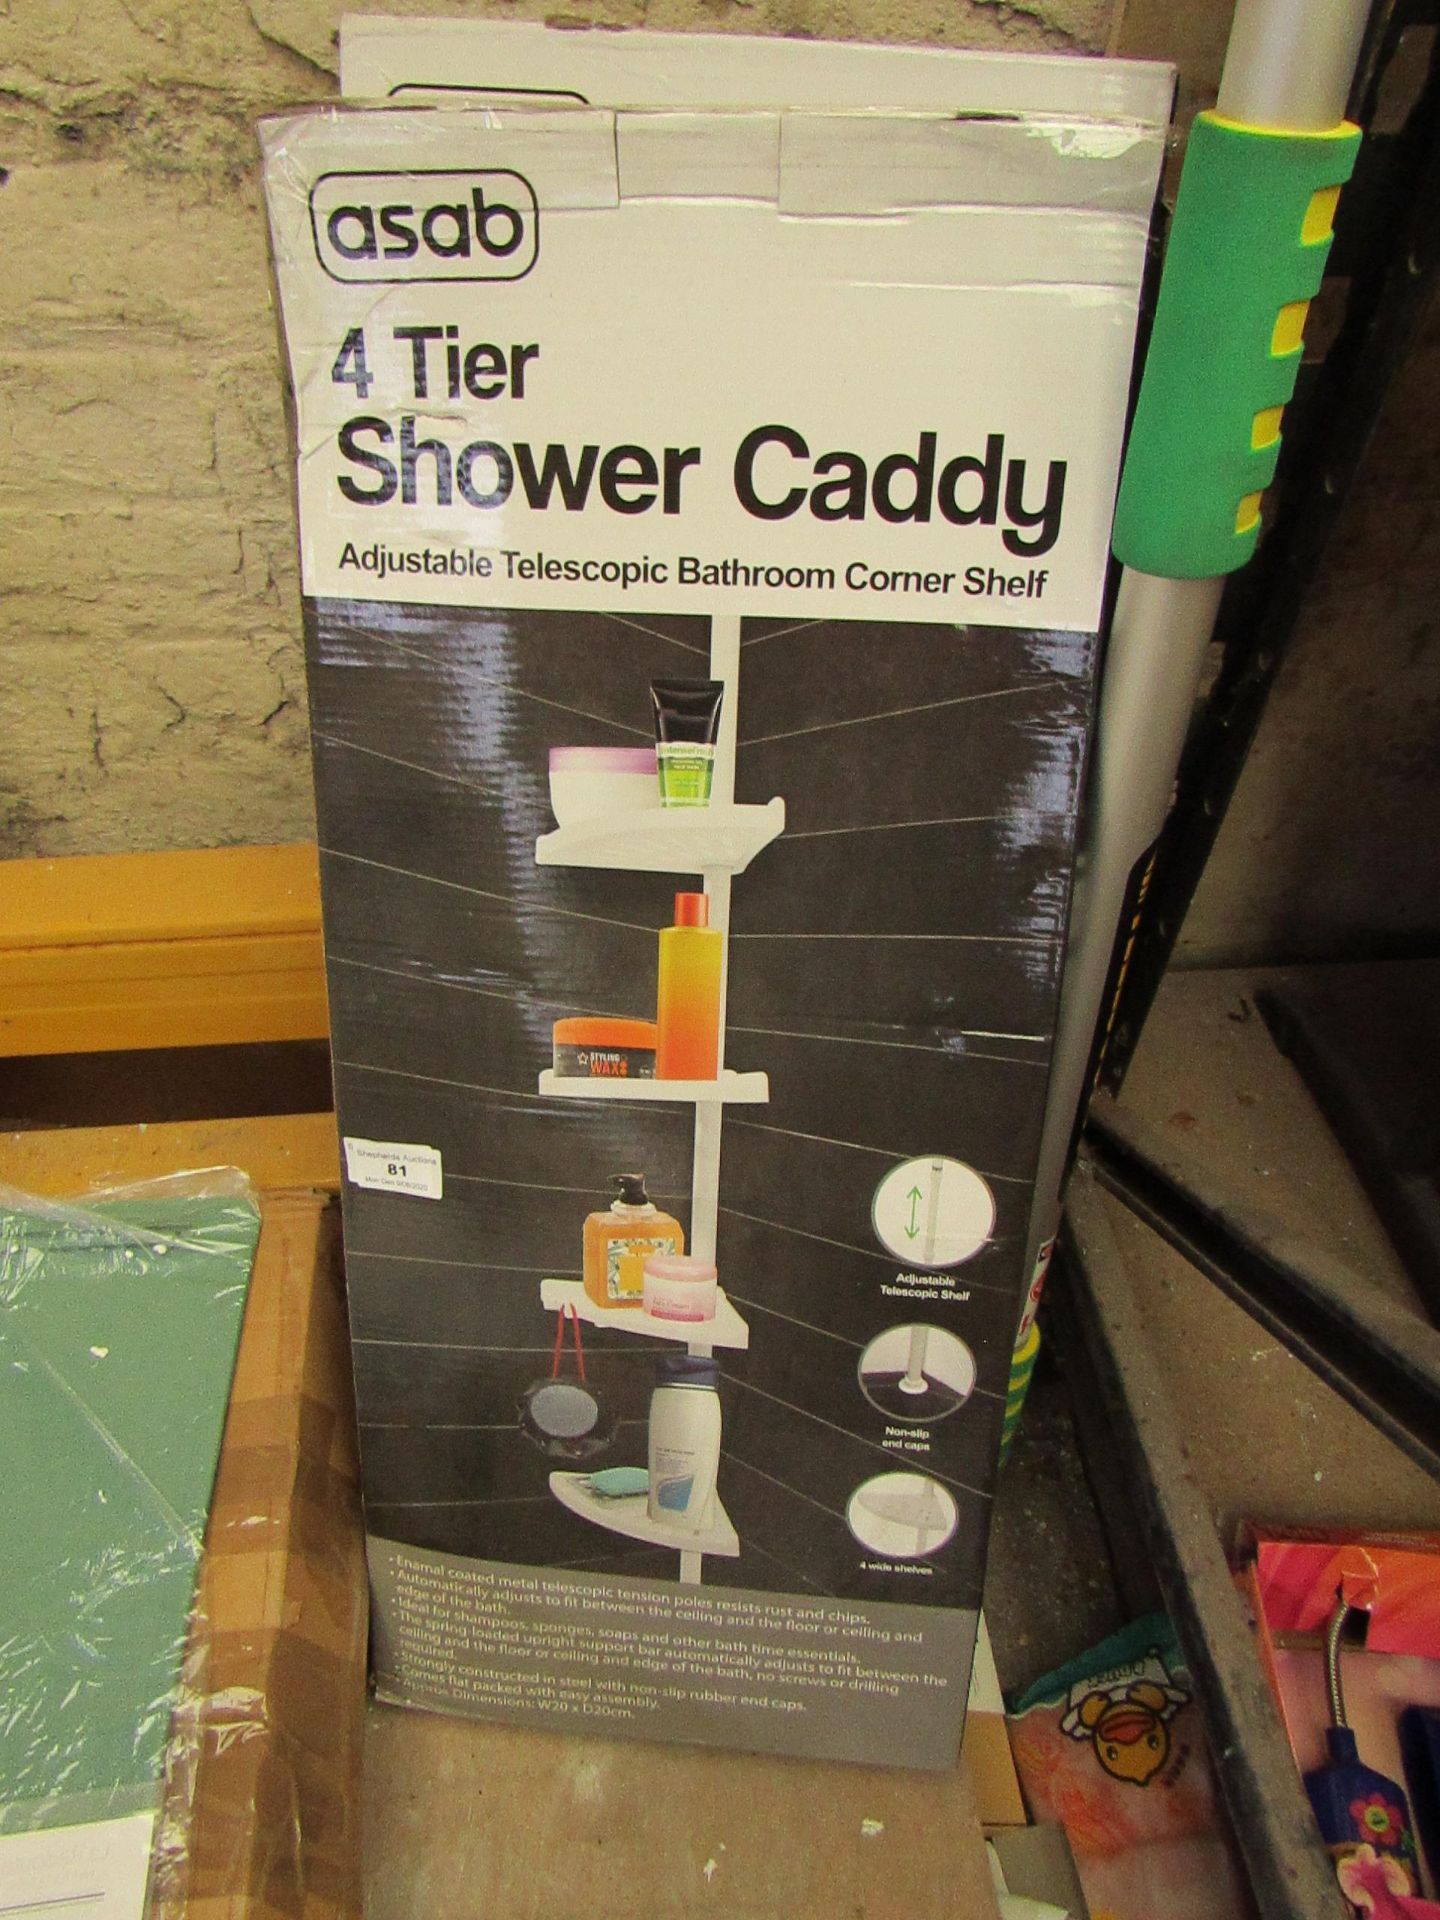 2 x Asab 4 tier Shower Caddys. Unchecked & Boxed